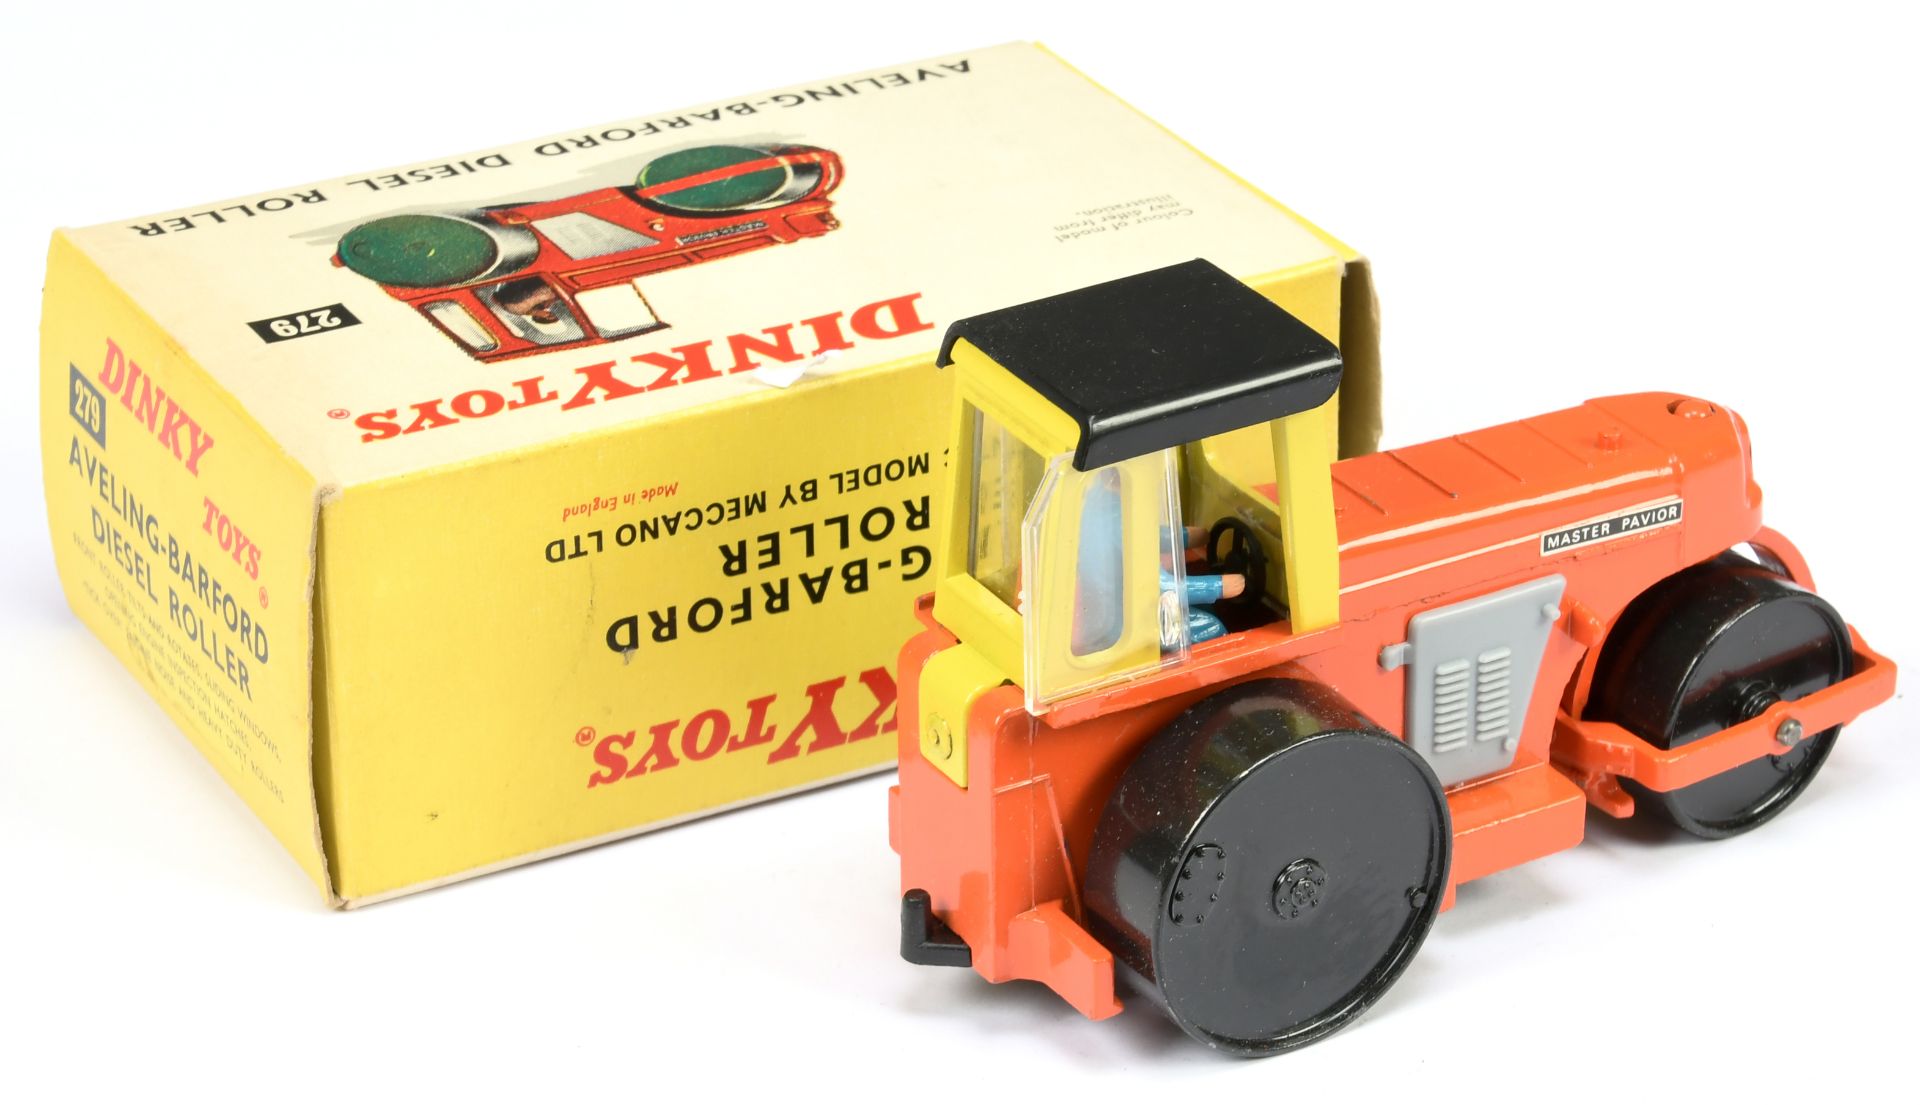 Dinky Toys 279 Aveling Barford Diesel Roller - orange body yellow cab with black roof, grey plast... - Image 2 of 2